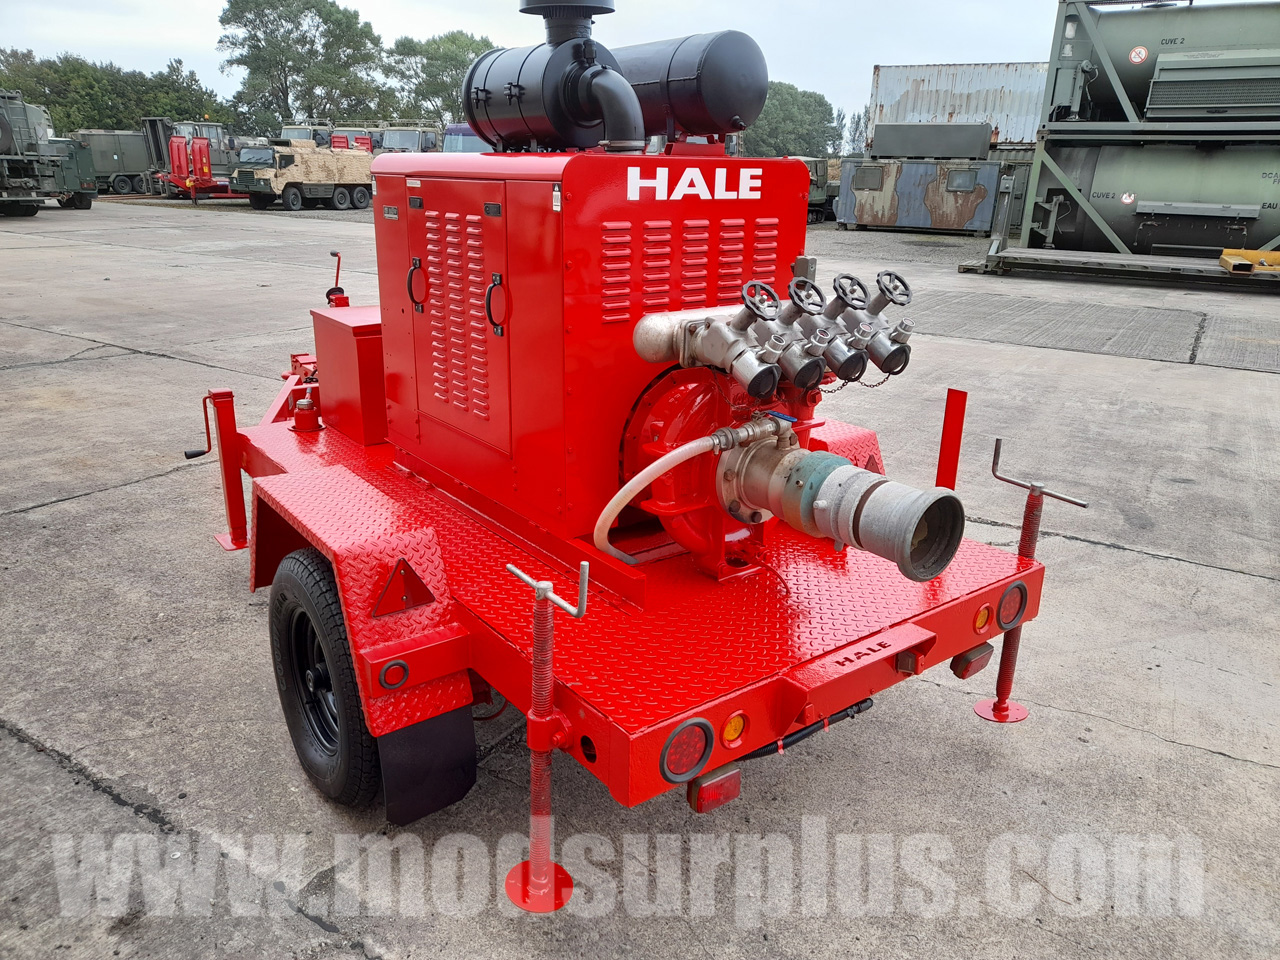 Hale Trailered High Capacity Fire Pump - Govsales of mod surplus ex army trucks, ex army land rovers and other military vehicles for sale